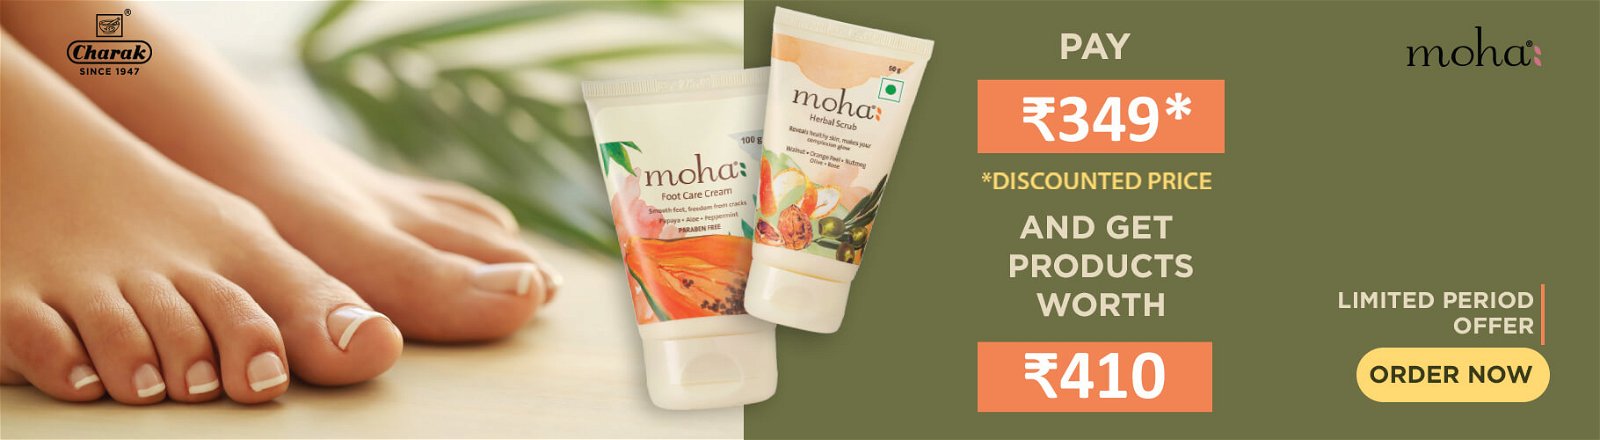 moha foot care with scrub free